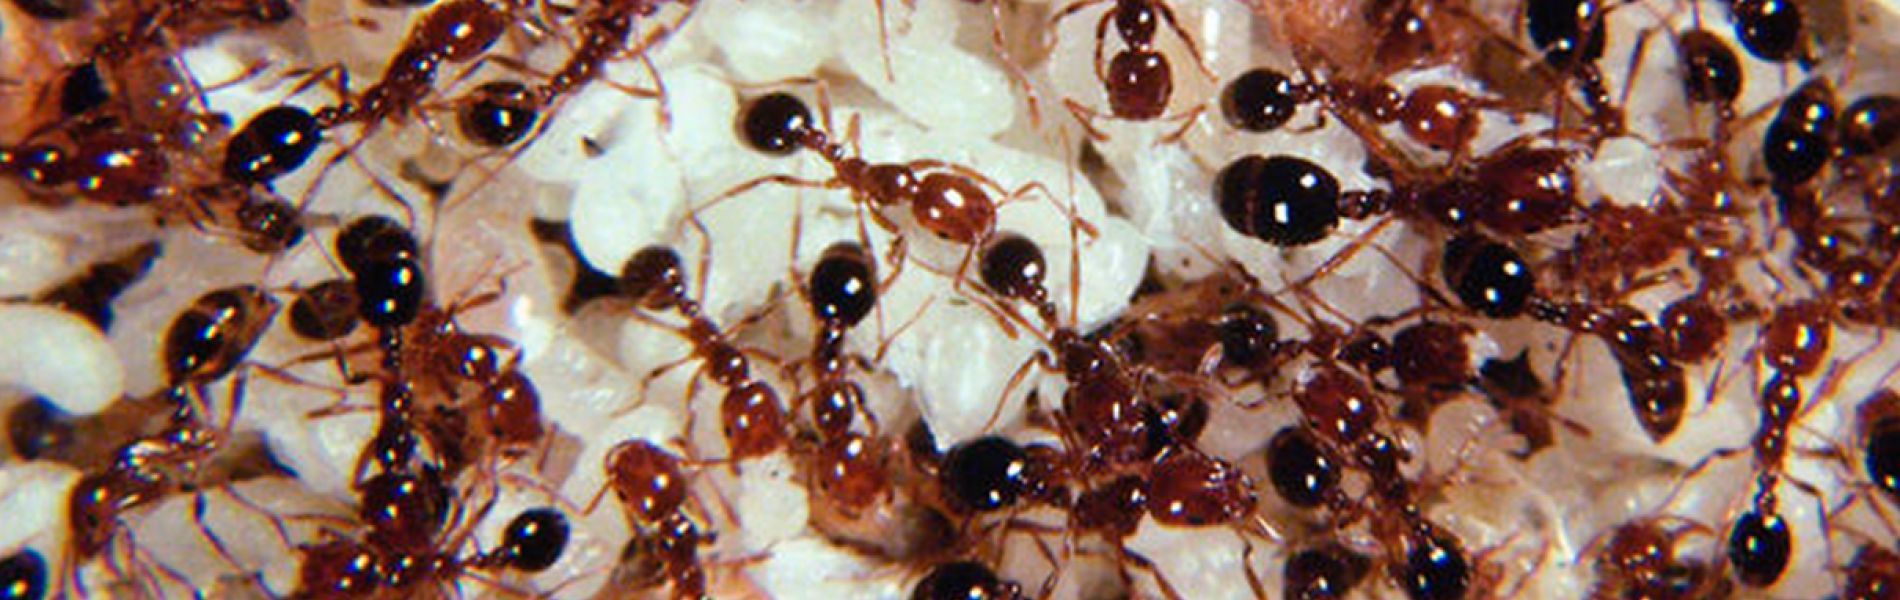 New funds to tackle fire ants